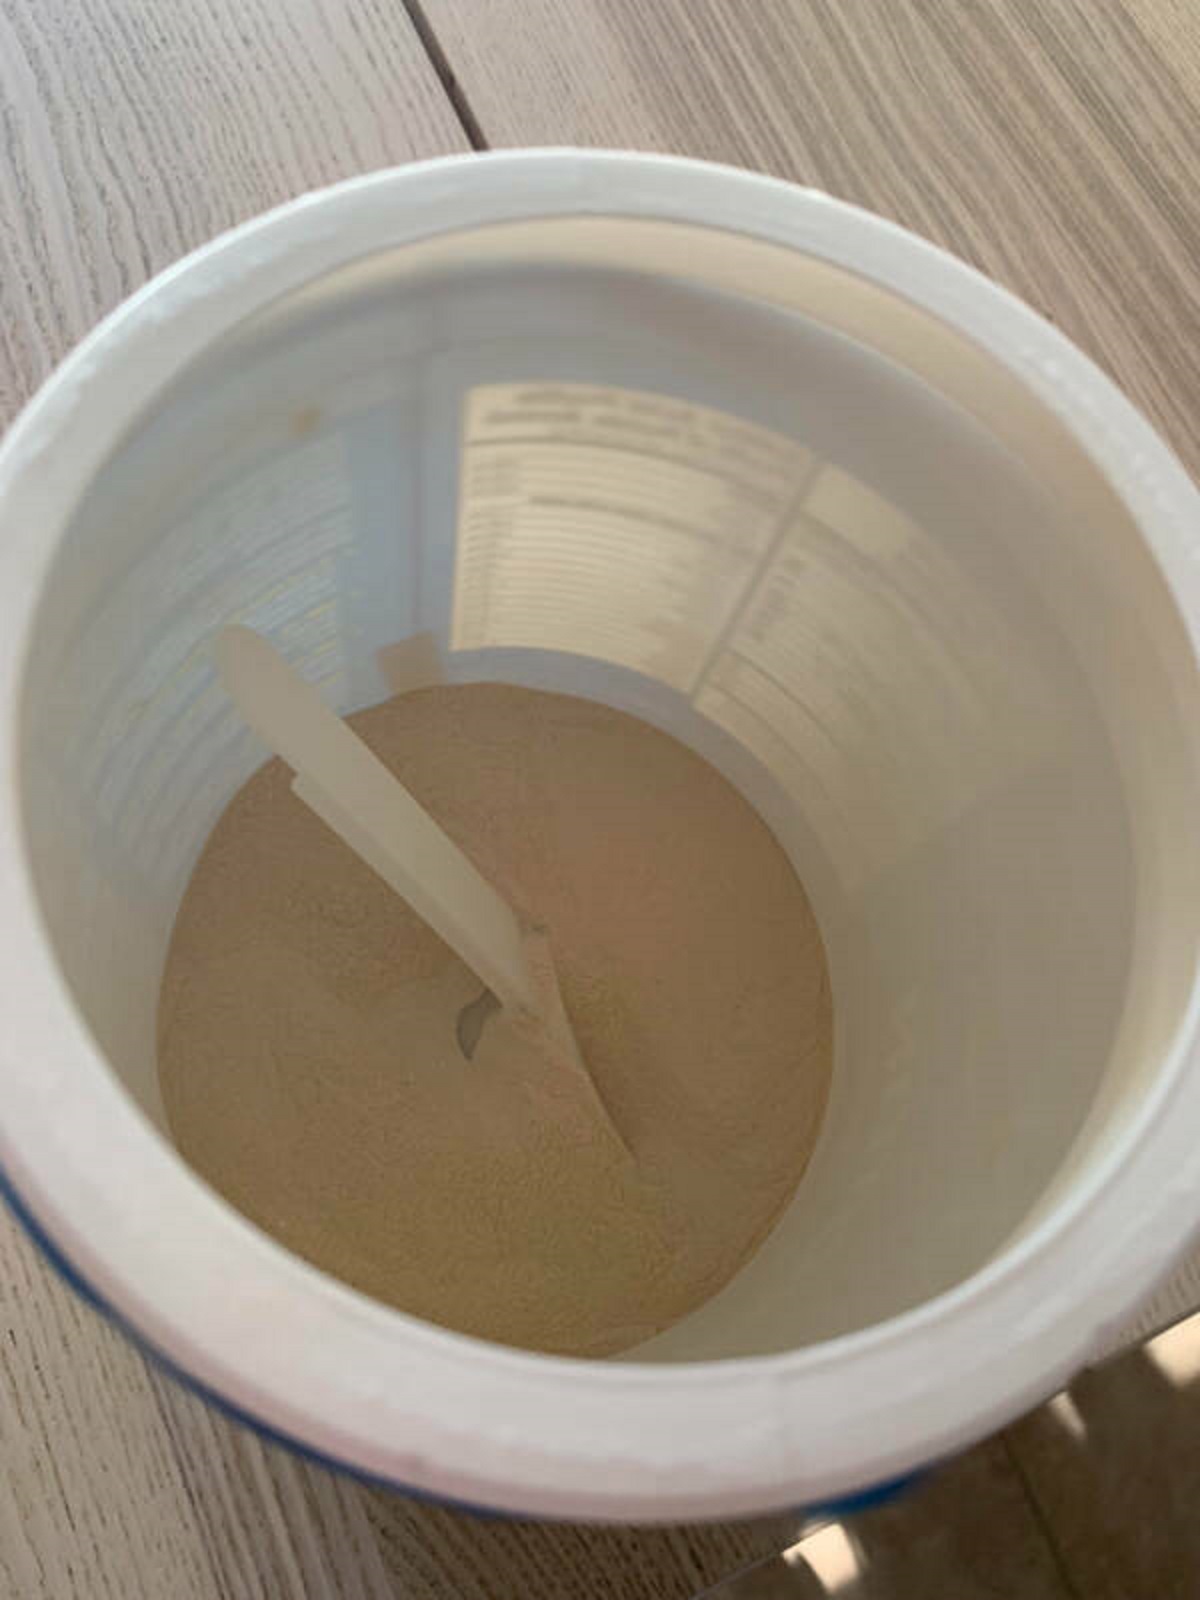 “I just opened this protein powder and this is how much was inside. What a joke. I could get probably 4 scoops out of this.”